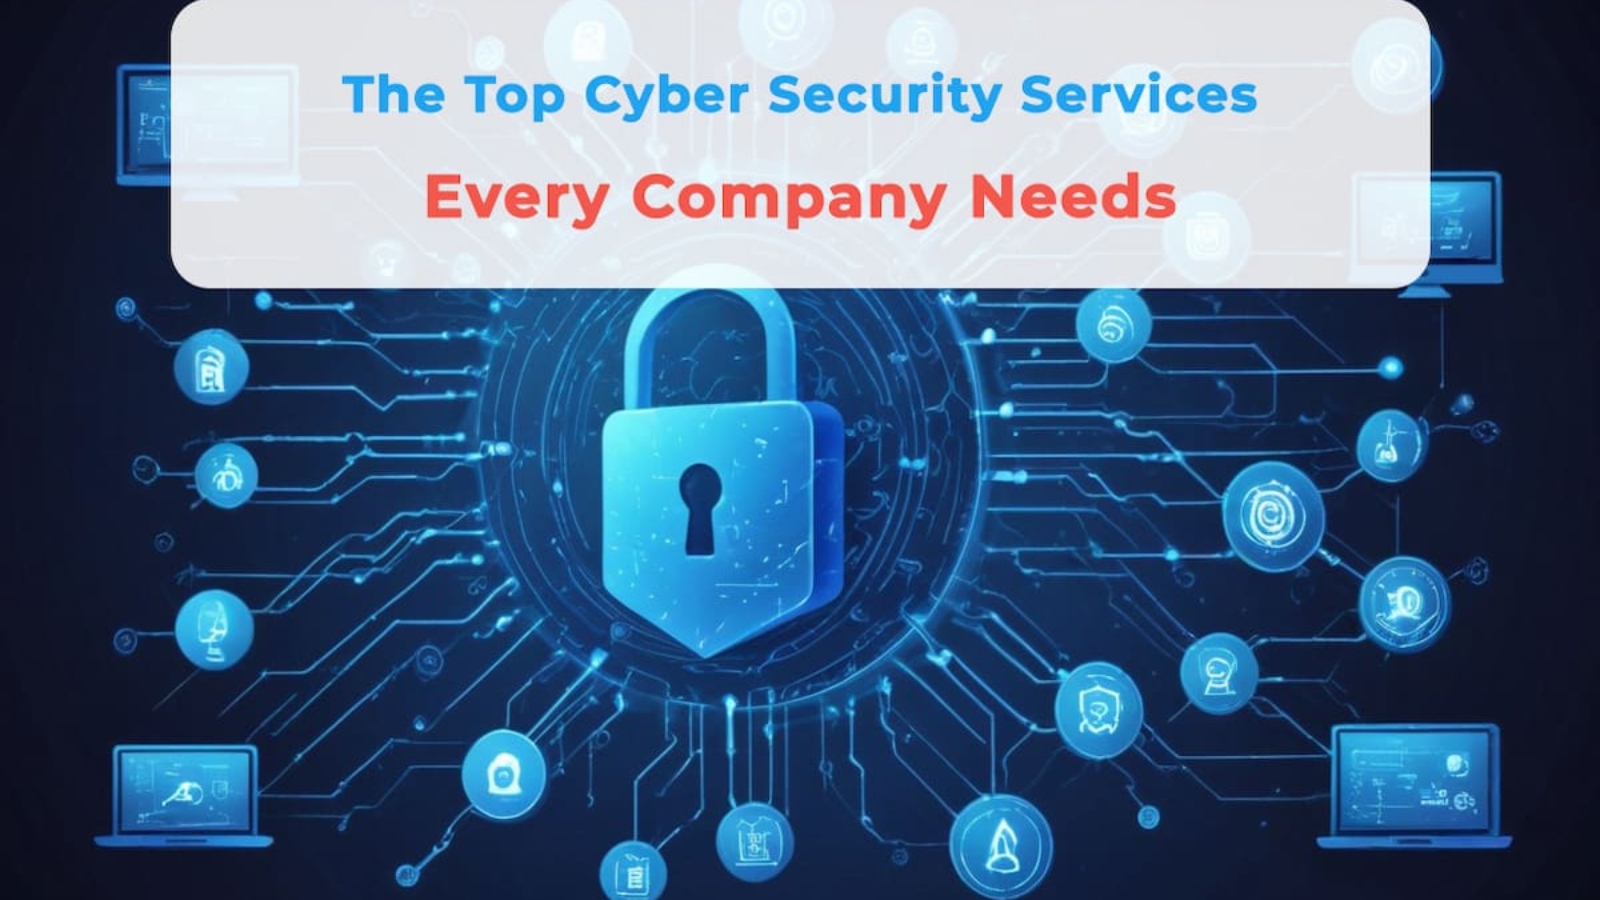 The Top Cyber Security Services Every Company Needs